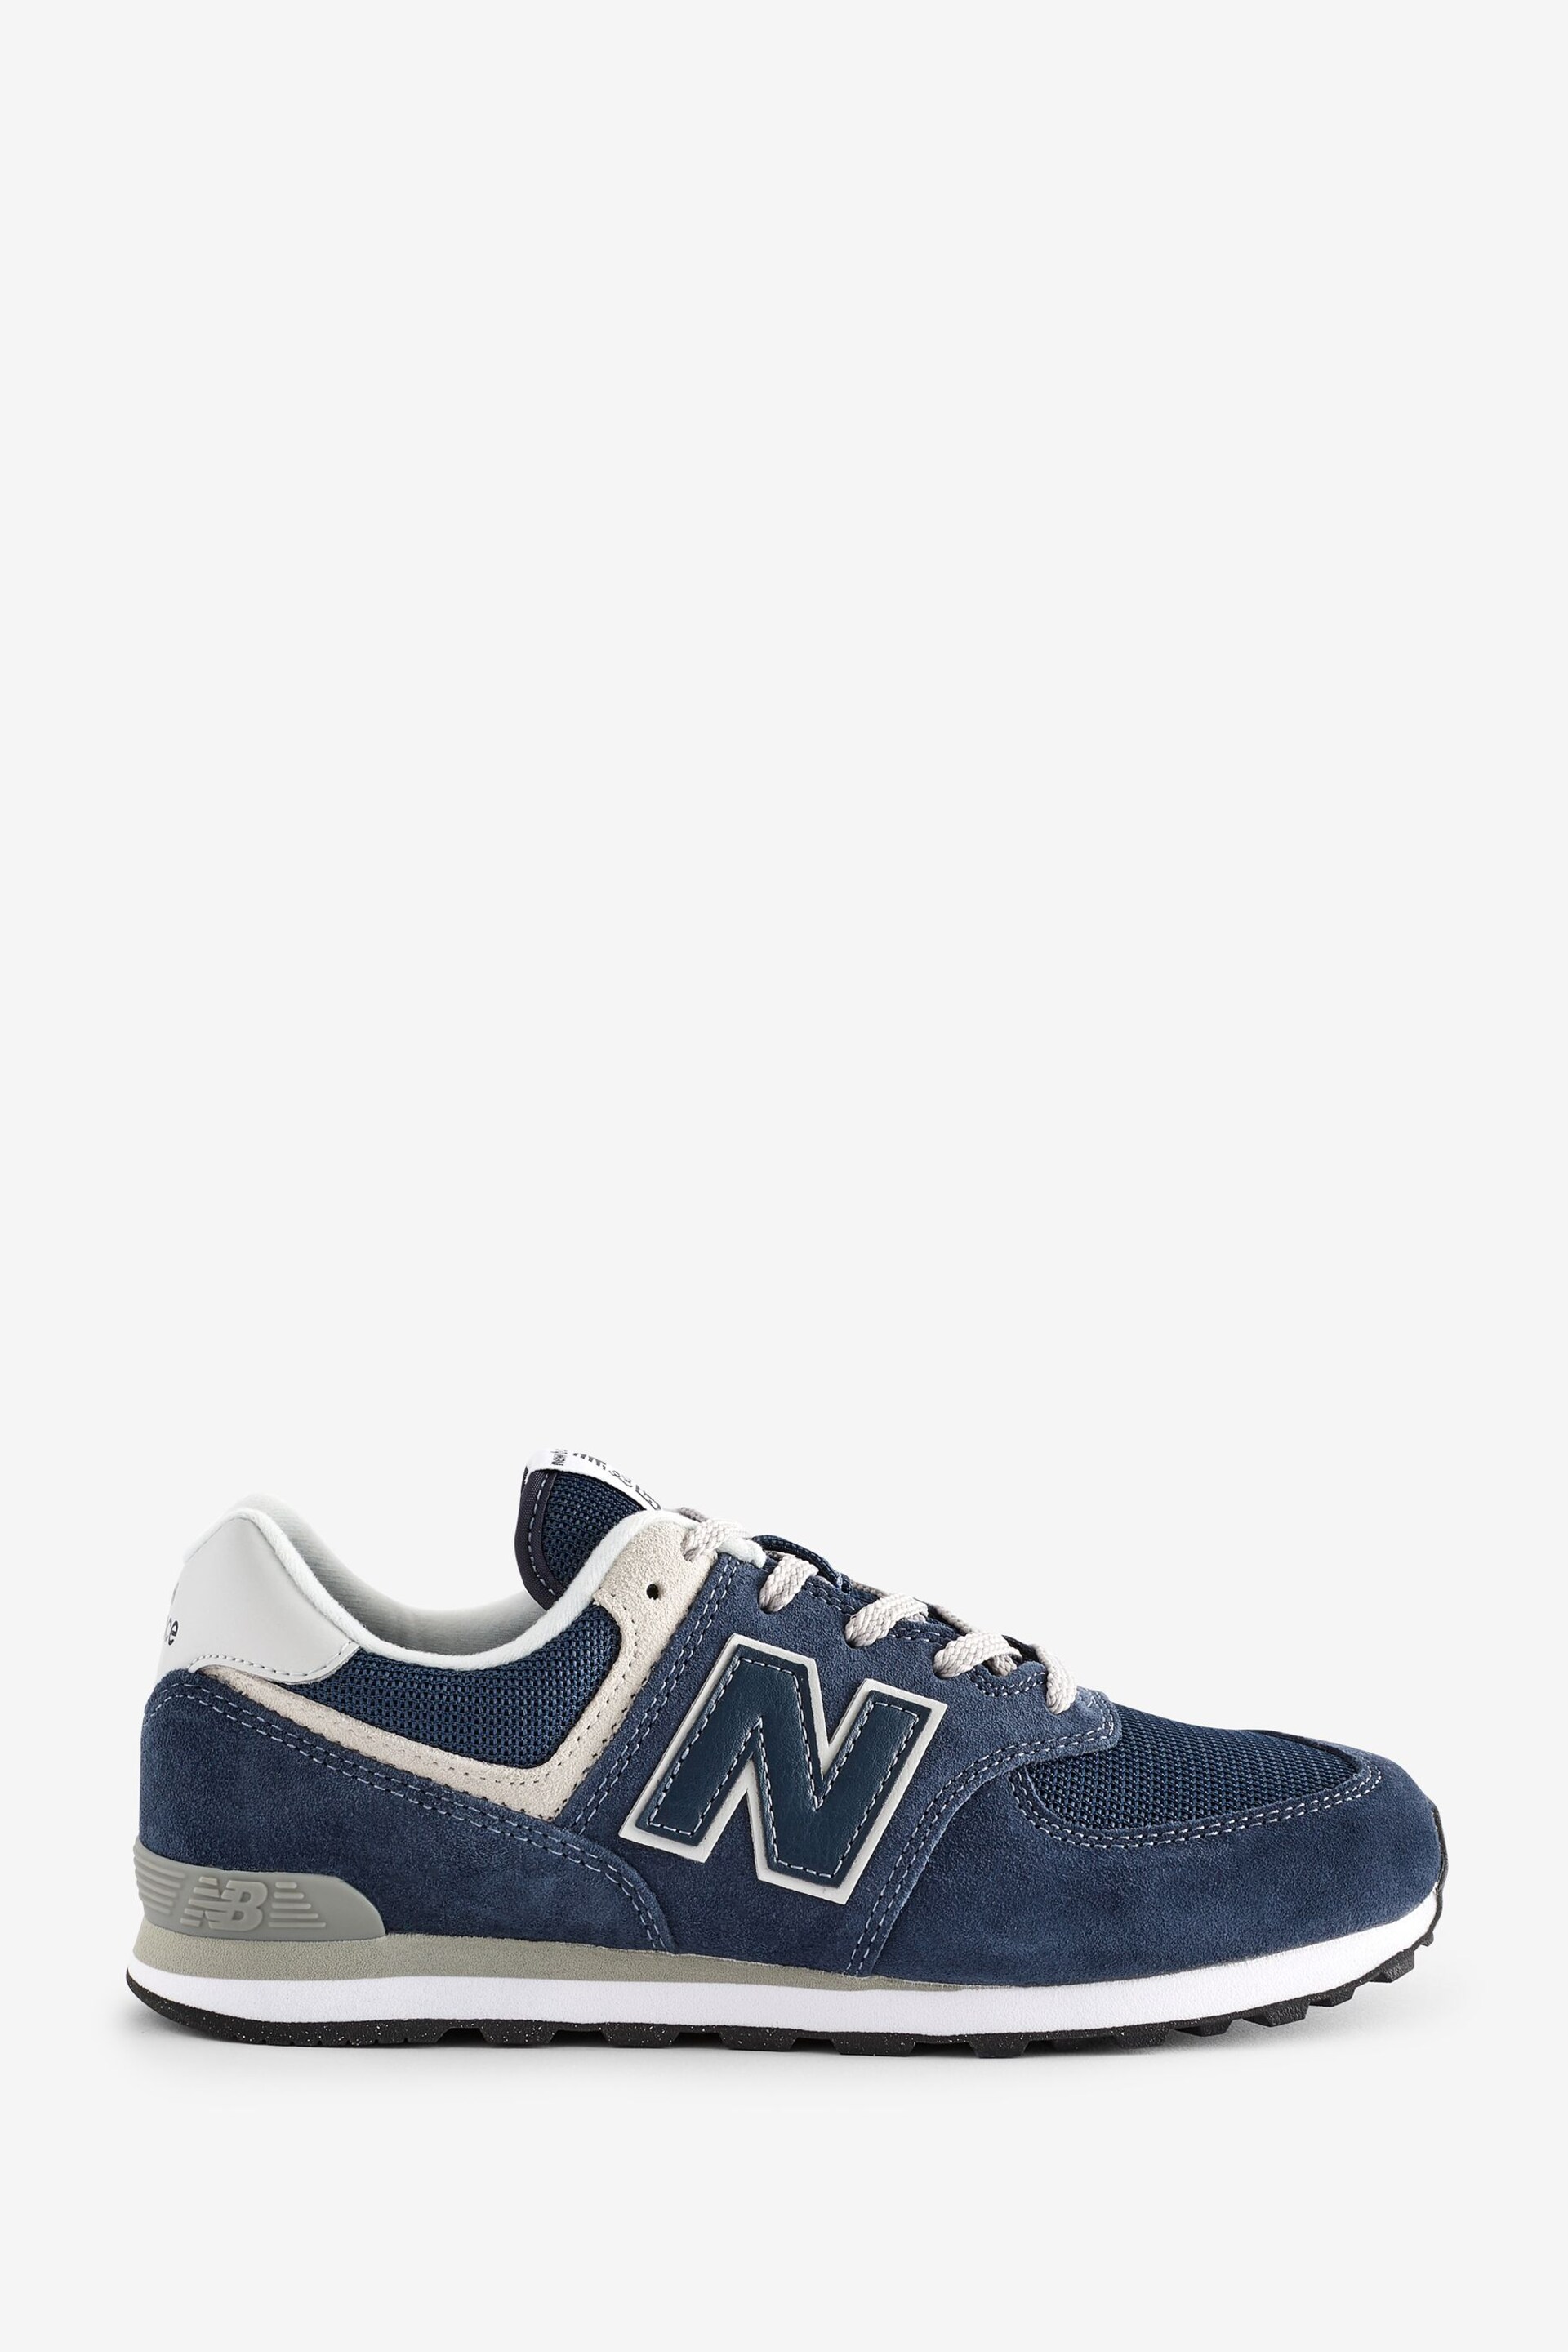 New Balance Blue Boys 574 Trainers - Image 1 of 7